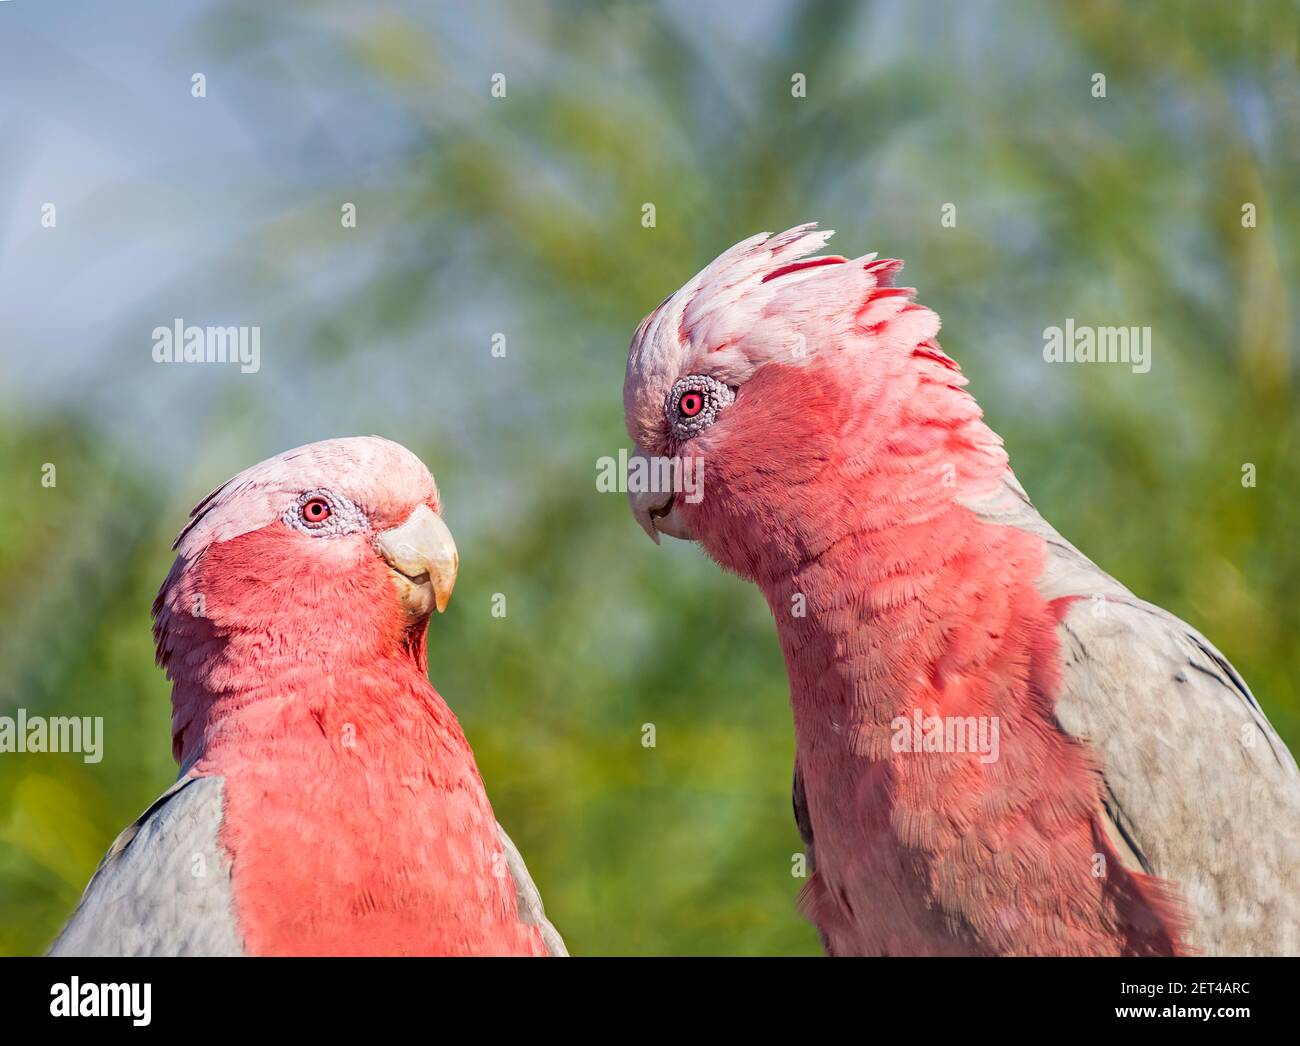 Two galah birds in a  tree looking at each other, Australia Stock Photo